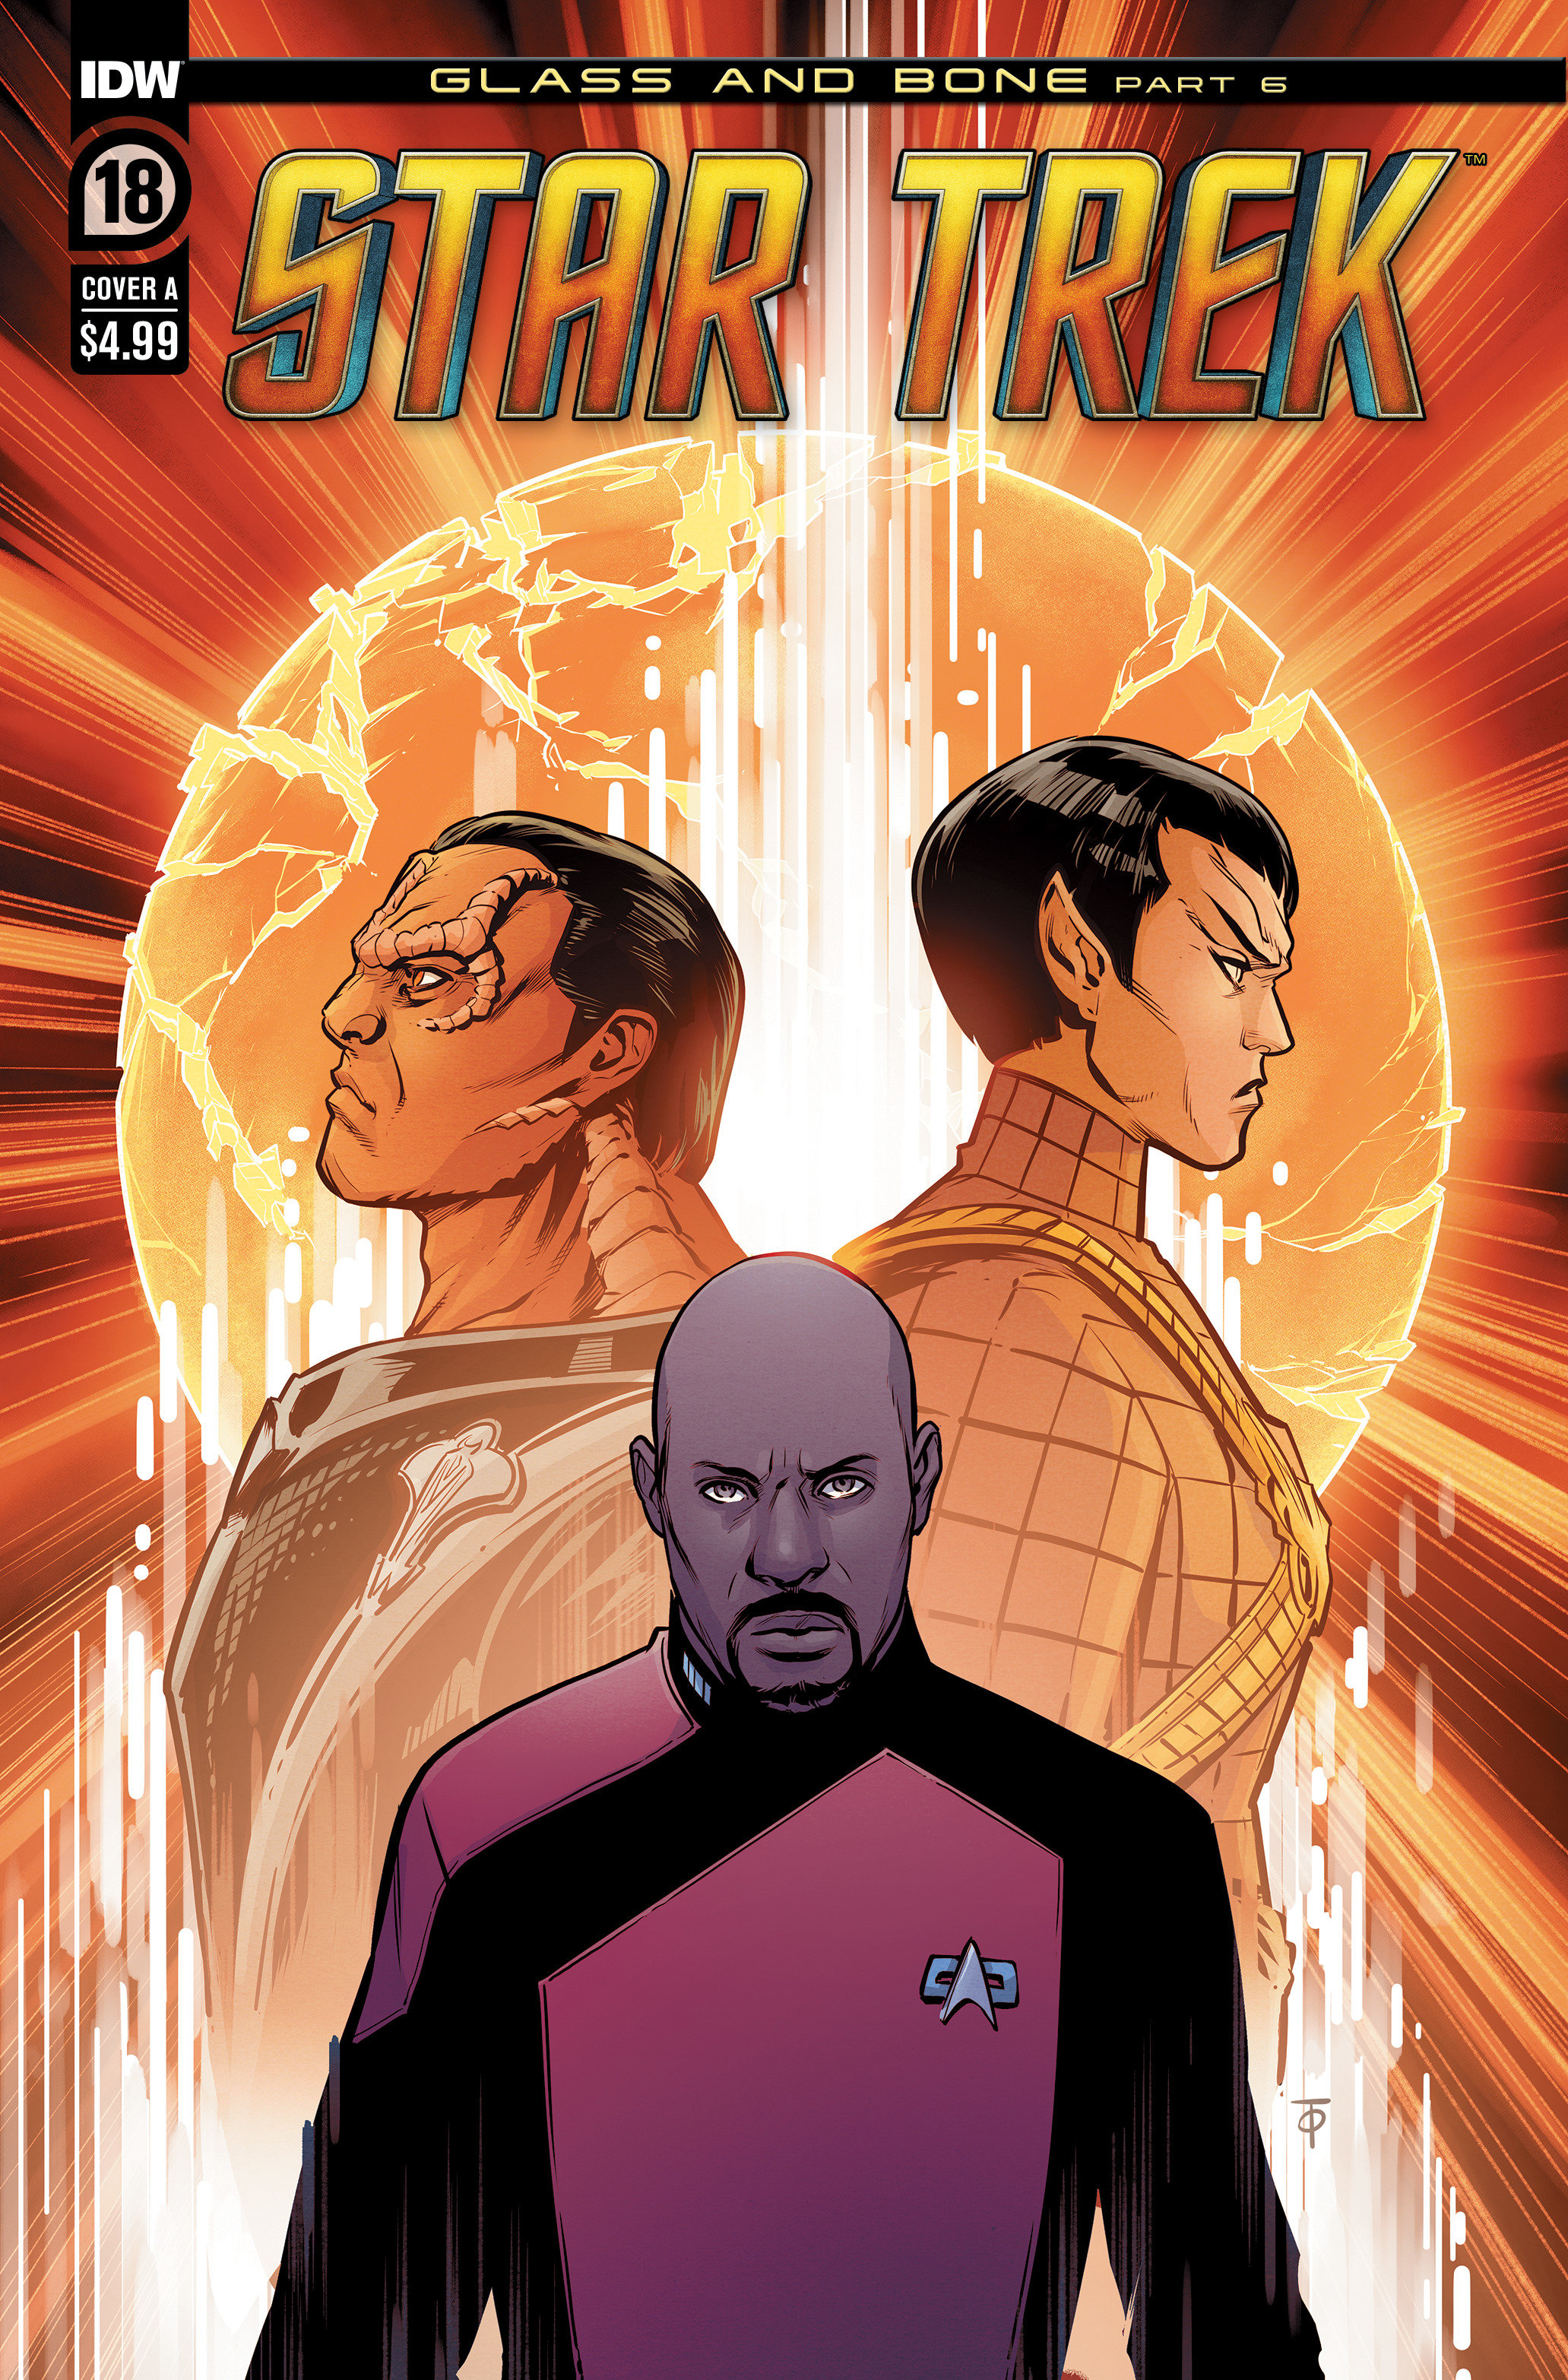 Star Trek #18 Cover A To